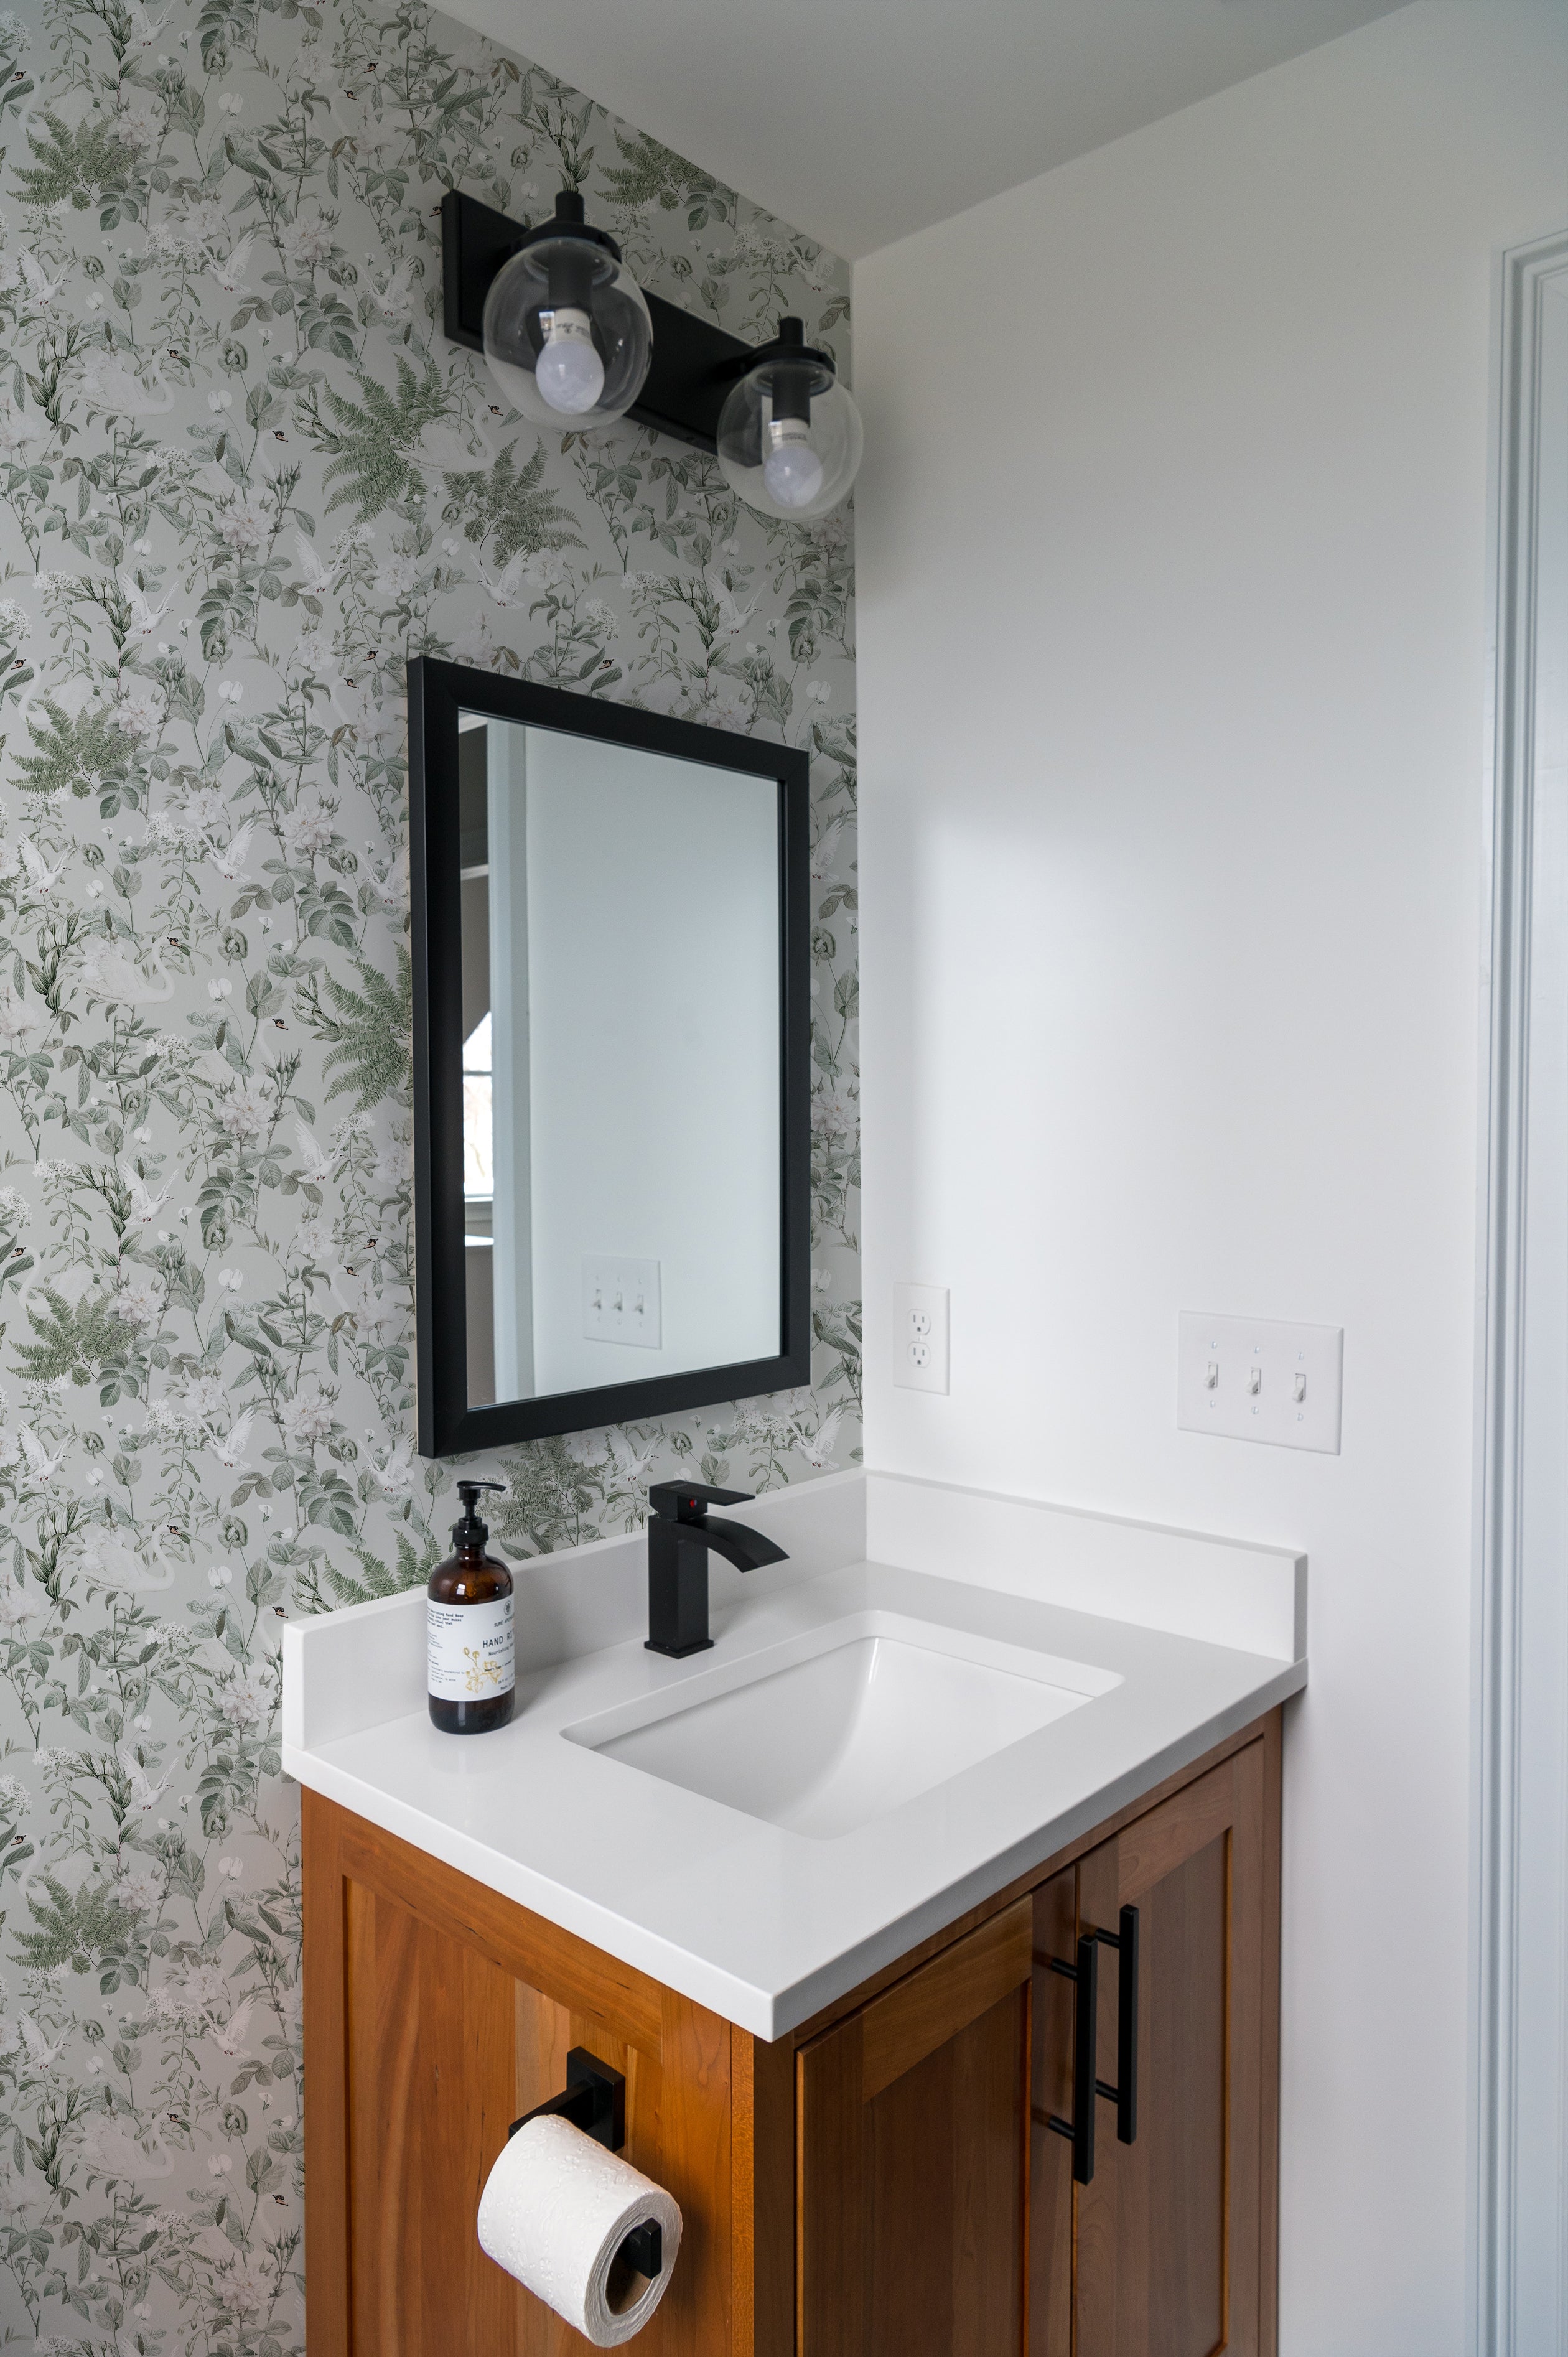 A modern bathroom enhanced by the Sage Bird Wallpaper, which wraps around the space, providing a calm and inviting ambiance. The wallpaper pairs well with the contemporary fixtures and wooden cabinetry, emphasizing the blend of nature and modern design.